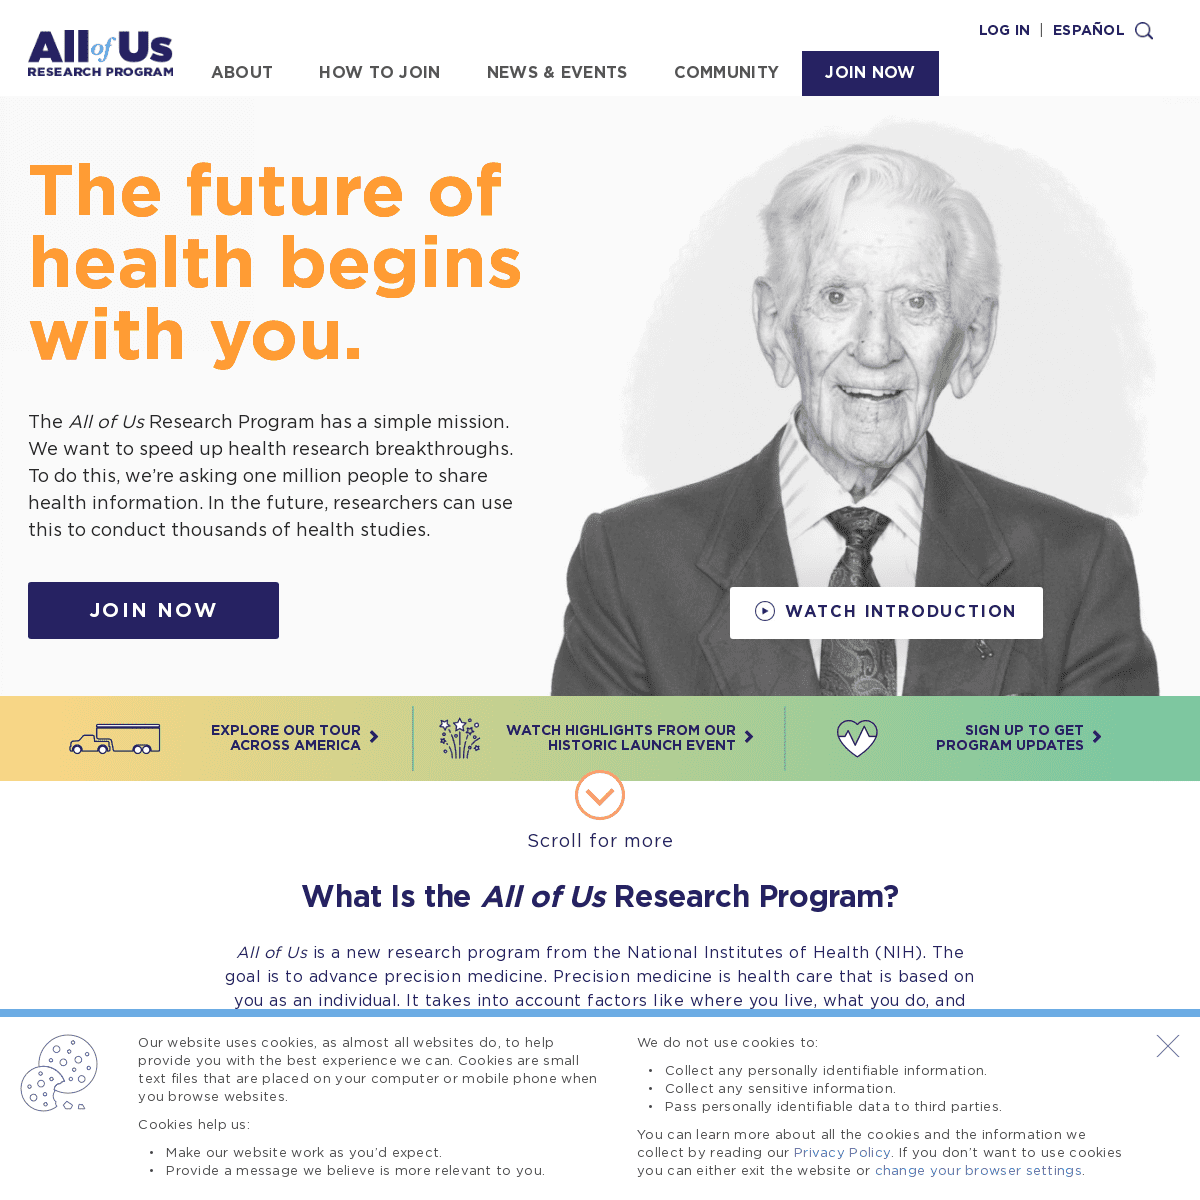 The All of Us Research Program - Help Speed Up The Future of Health